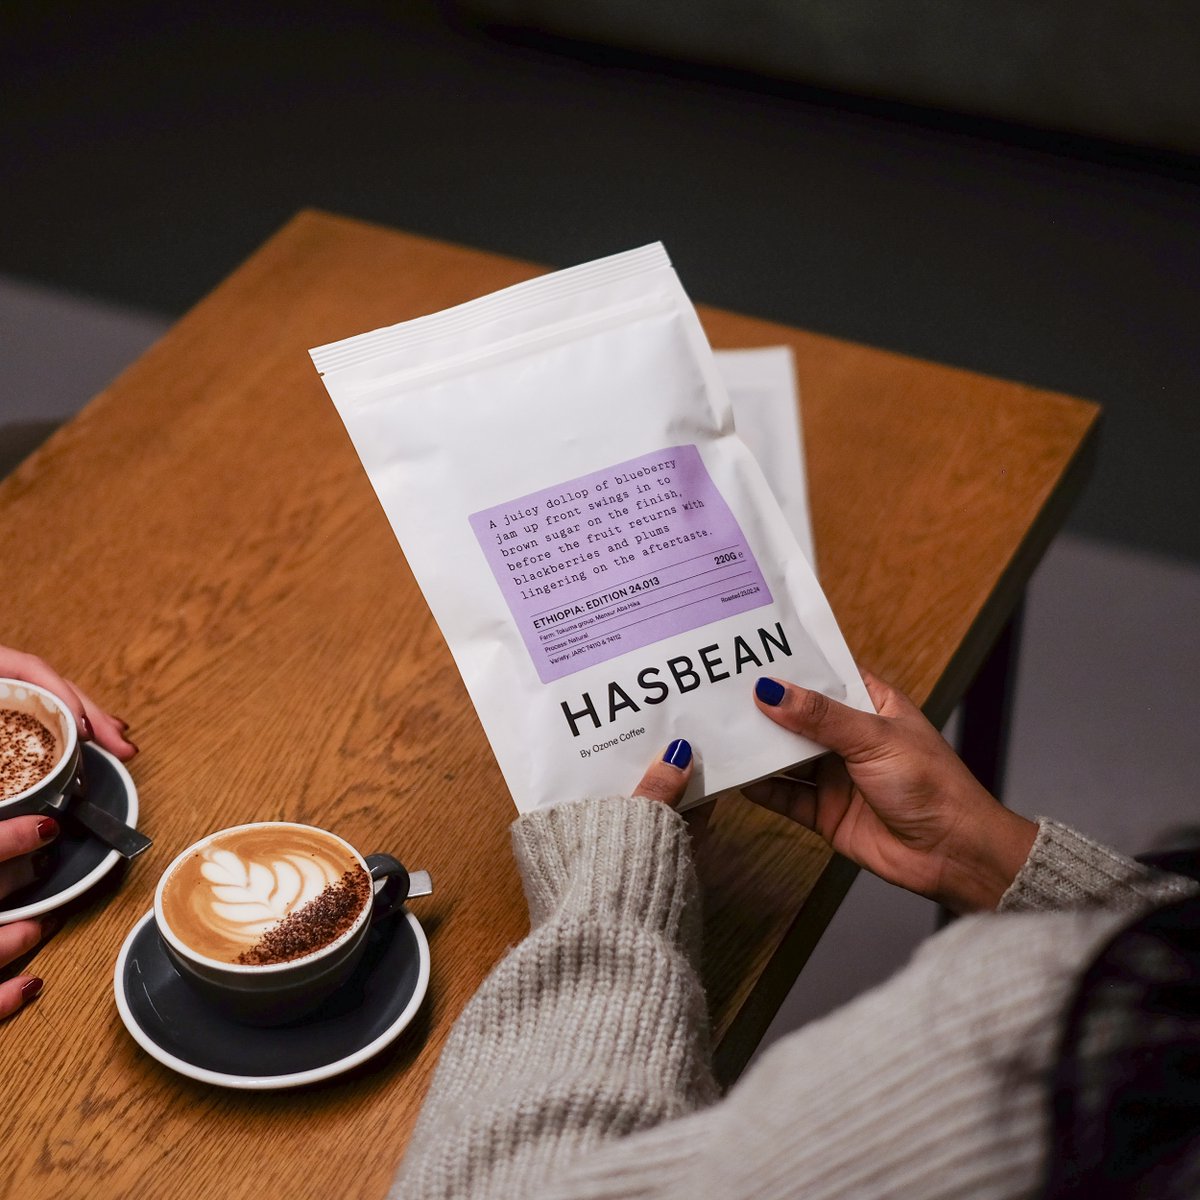 Warm their heart with delicious coffee – a gift that says 'you're cherished’ every morning☕ [Image description: A person holding a bag of Ethiopia: Edition 24.013 with a cup of cappuccino.]